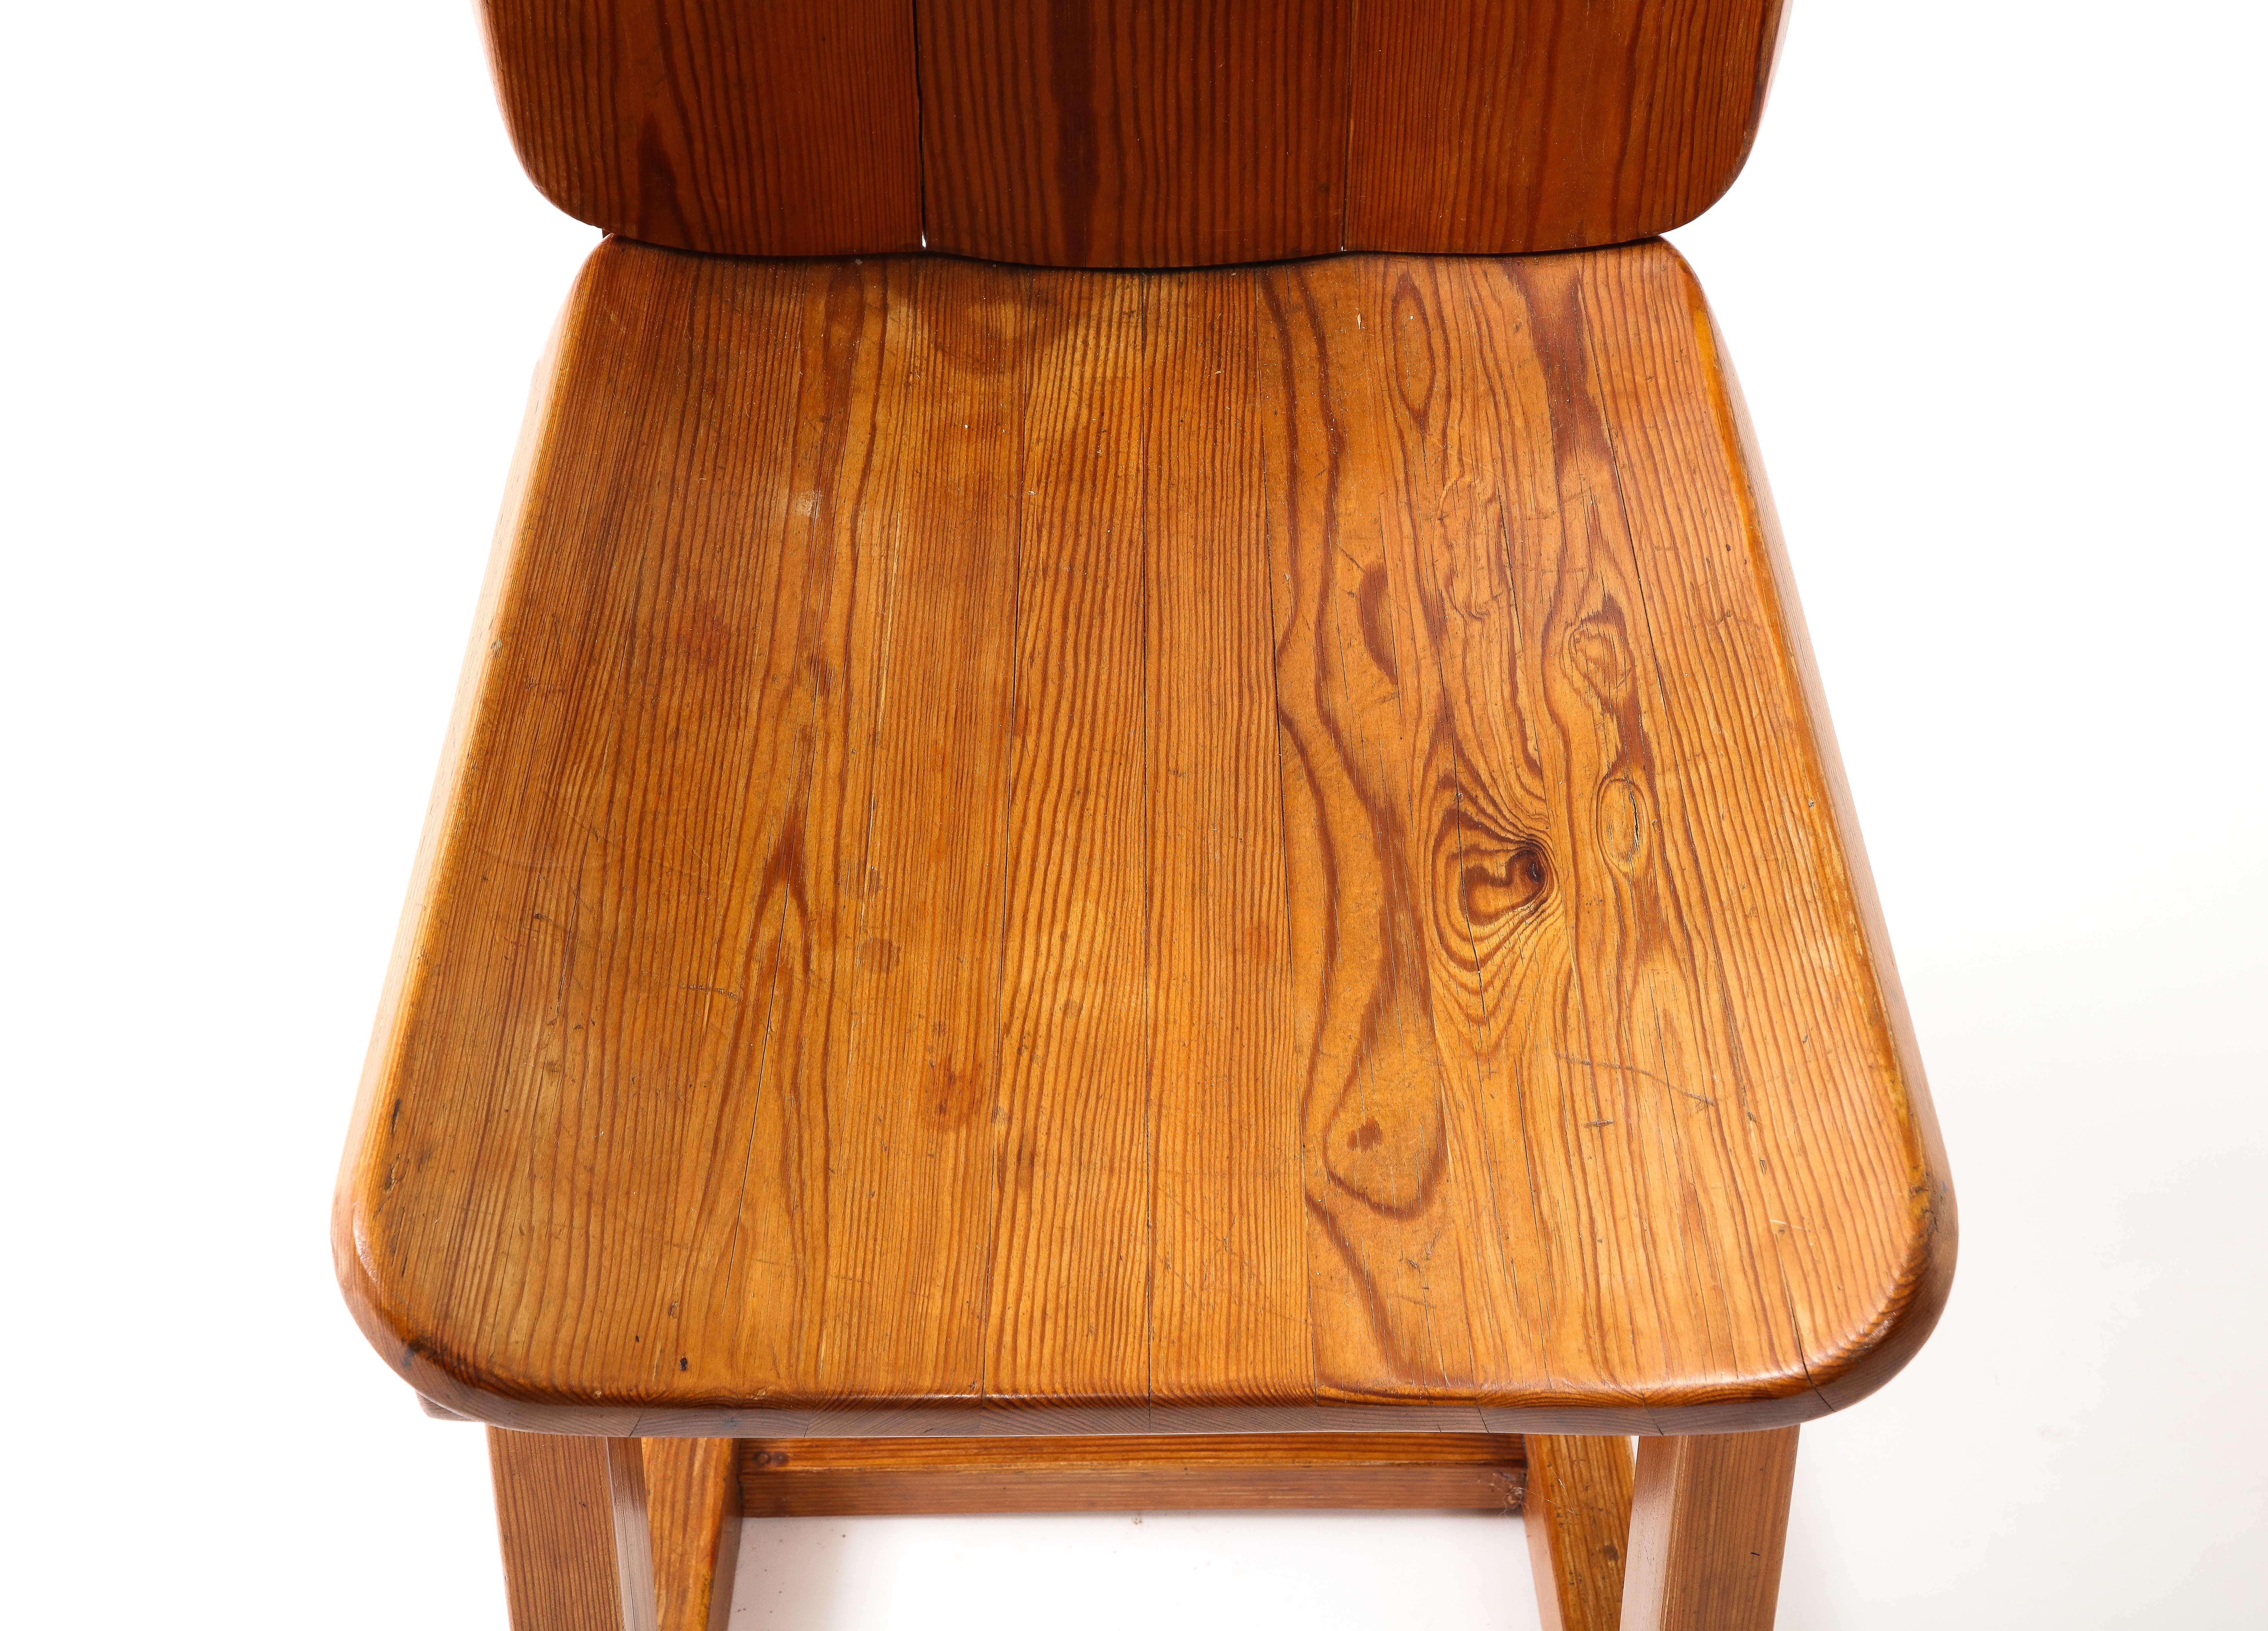 Solid Elm side chair with an interesting layered, geometric base.
